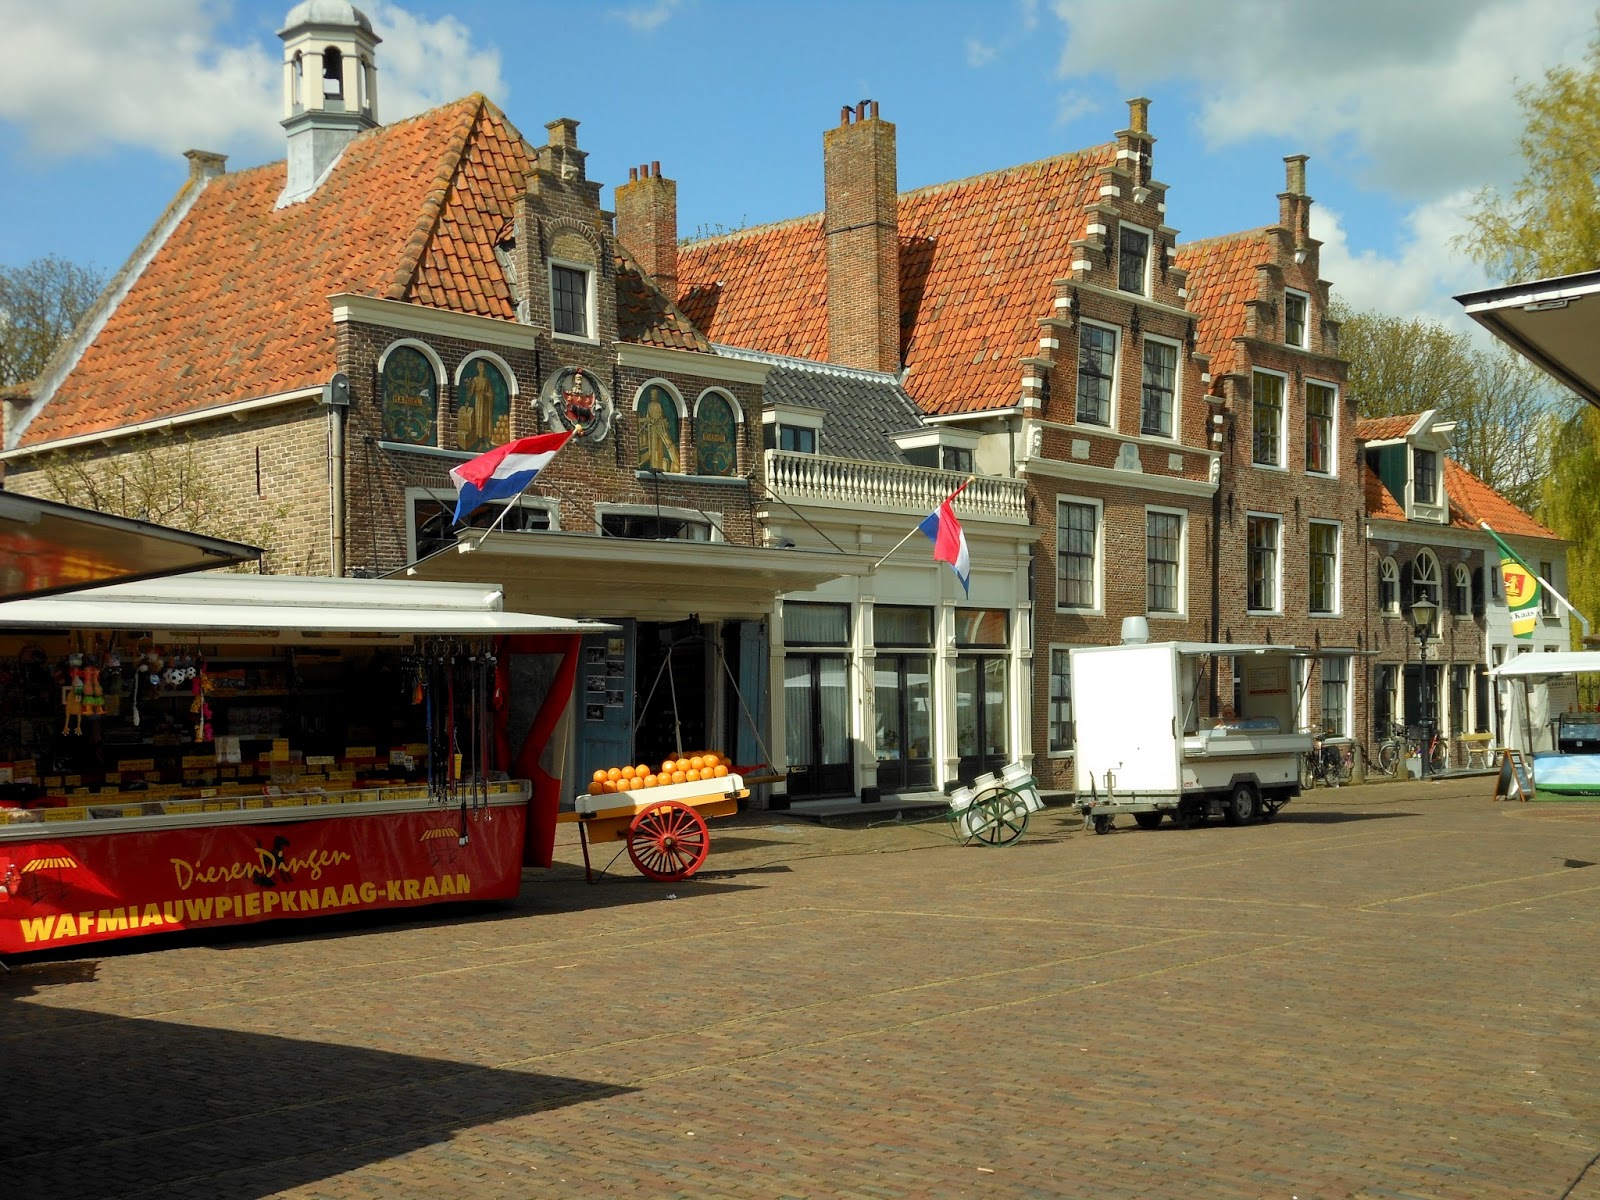 The cheese market in Edam, the Netherlands